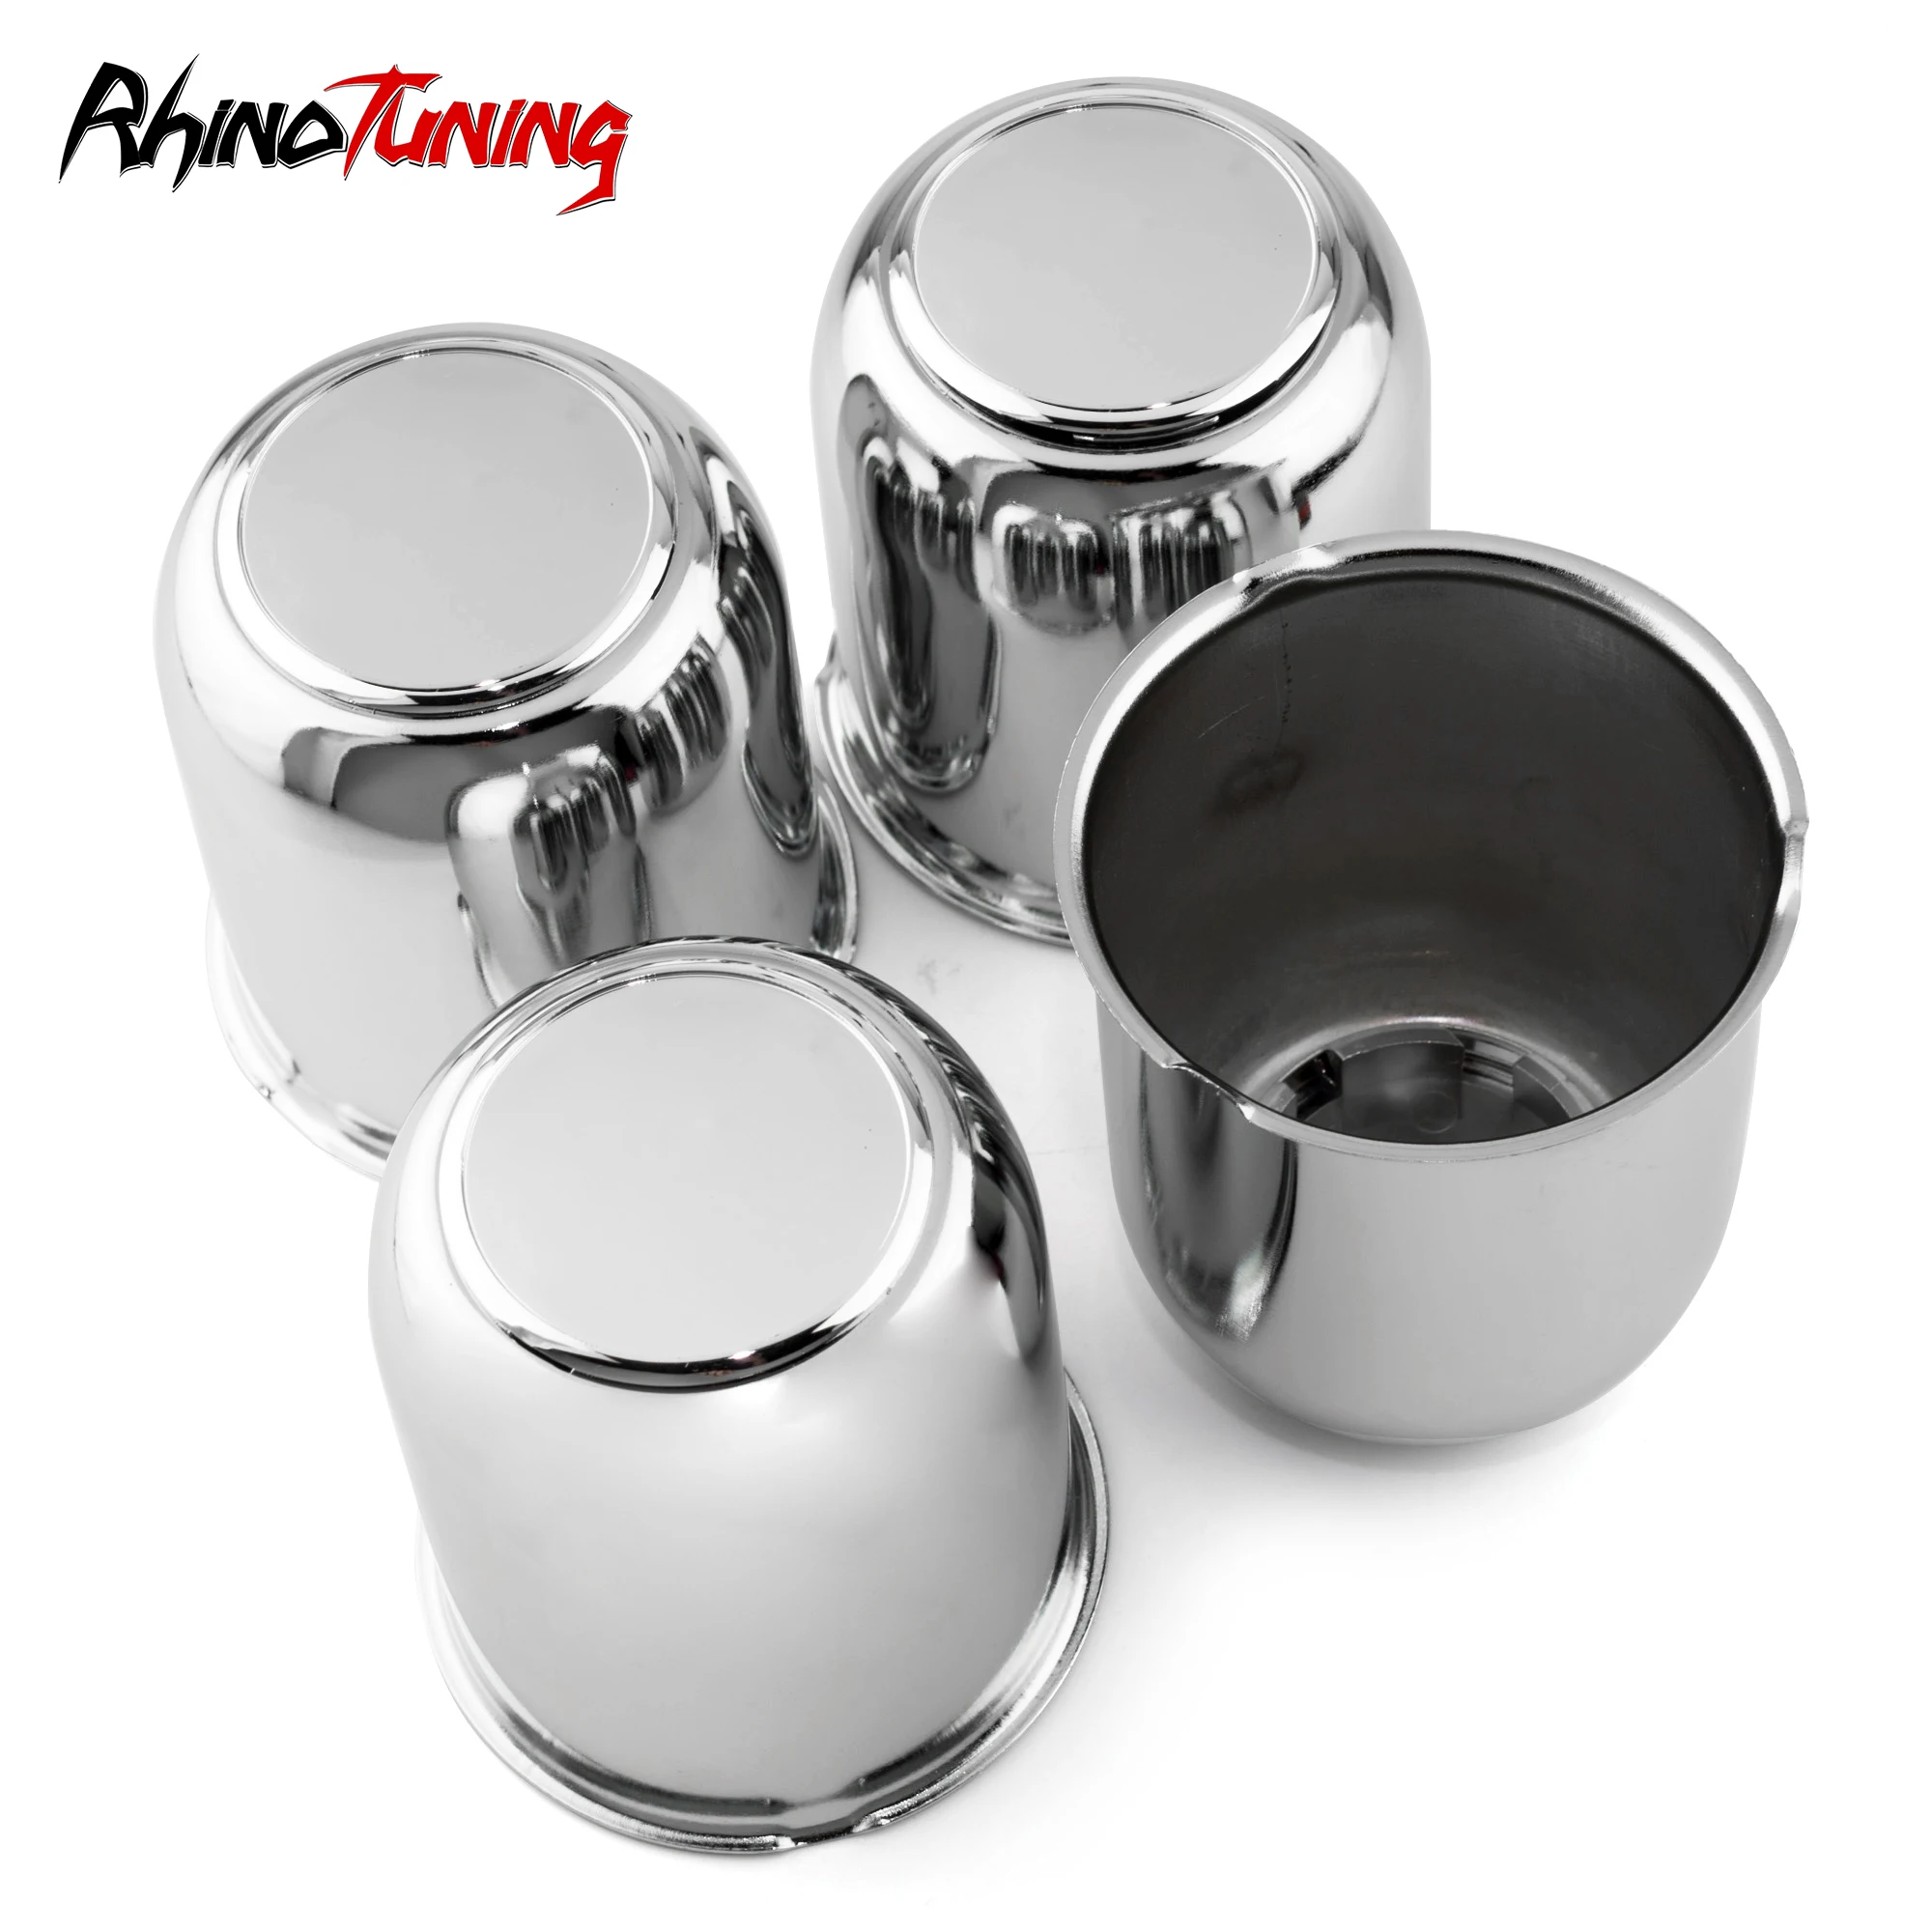 

4pcs 3.19in 81mm Push Through Center Caps For Hub Cover Wheel Rim Hubcap Bore Auto Truck Or Trailer 3.50in Tall Chrome